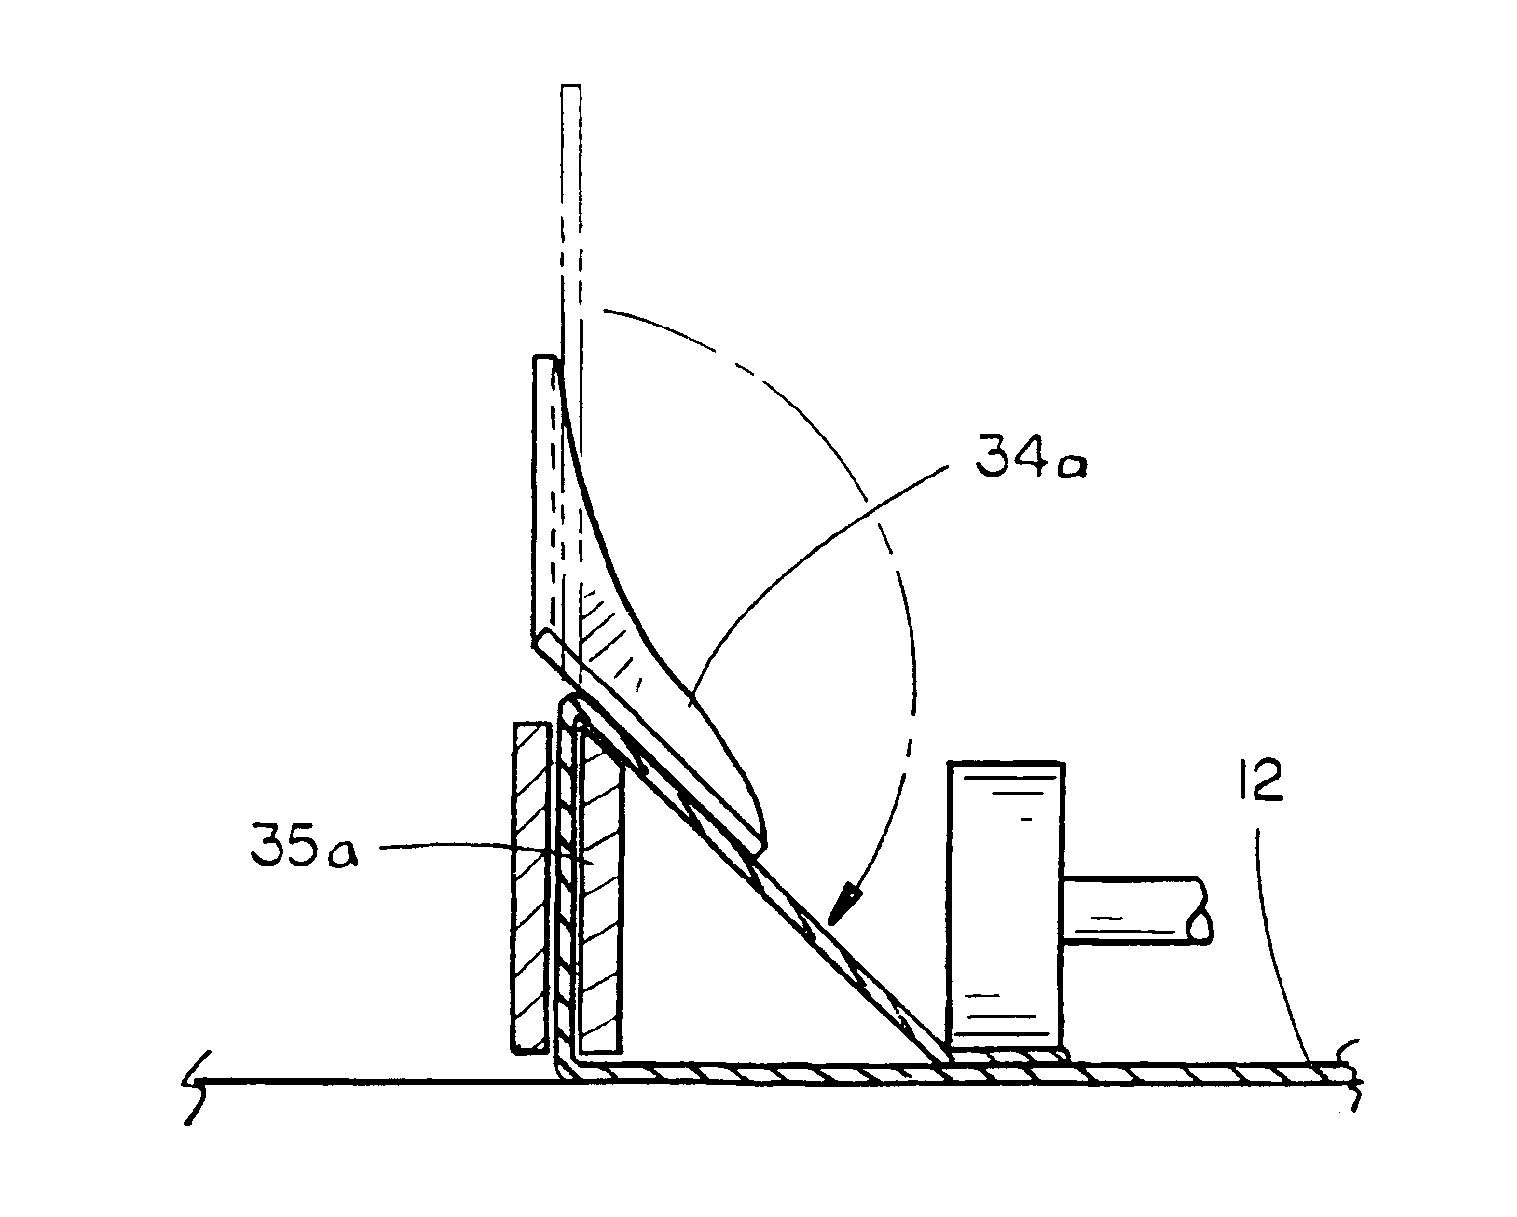 Method of forming box with gusseted corner